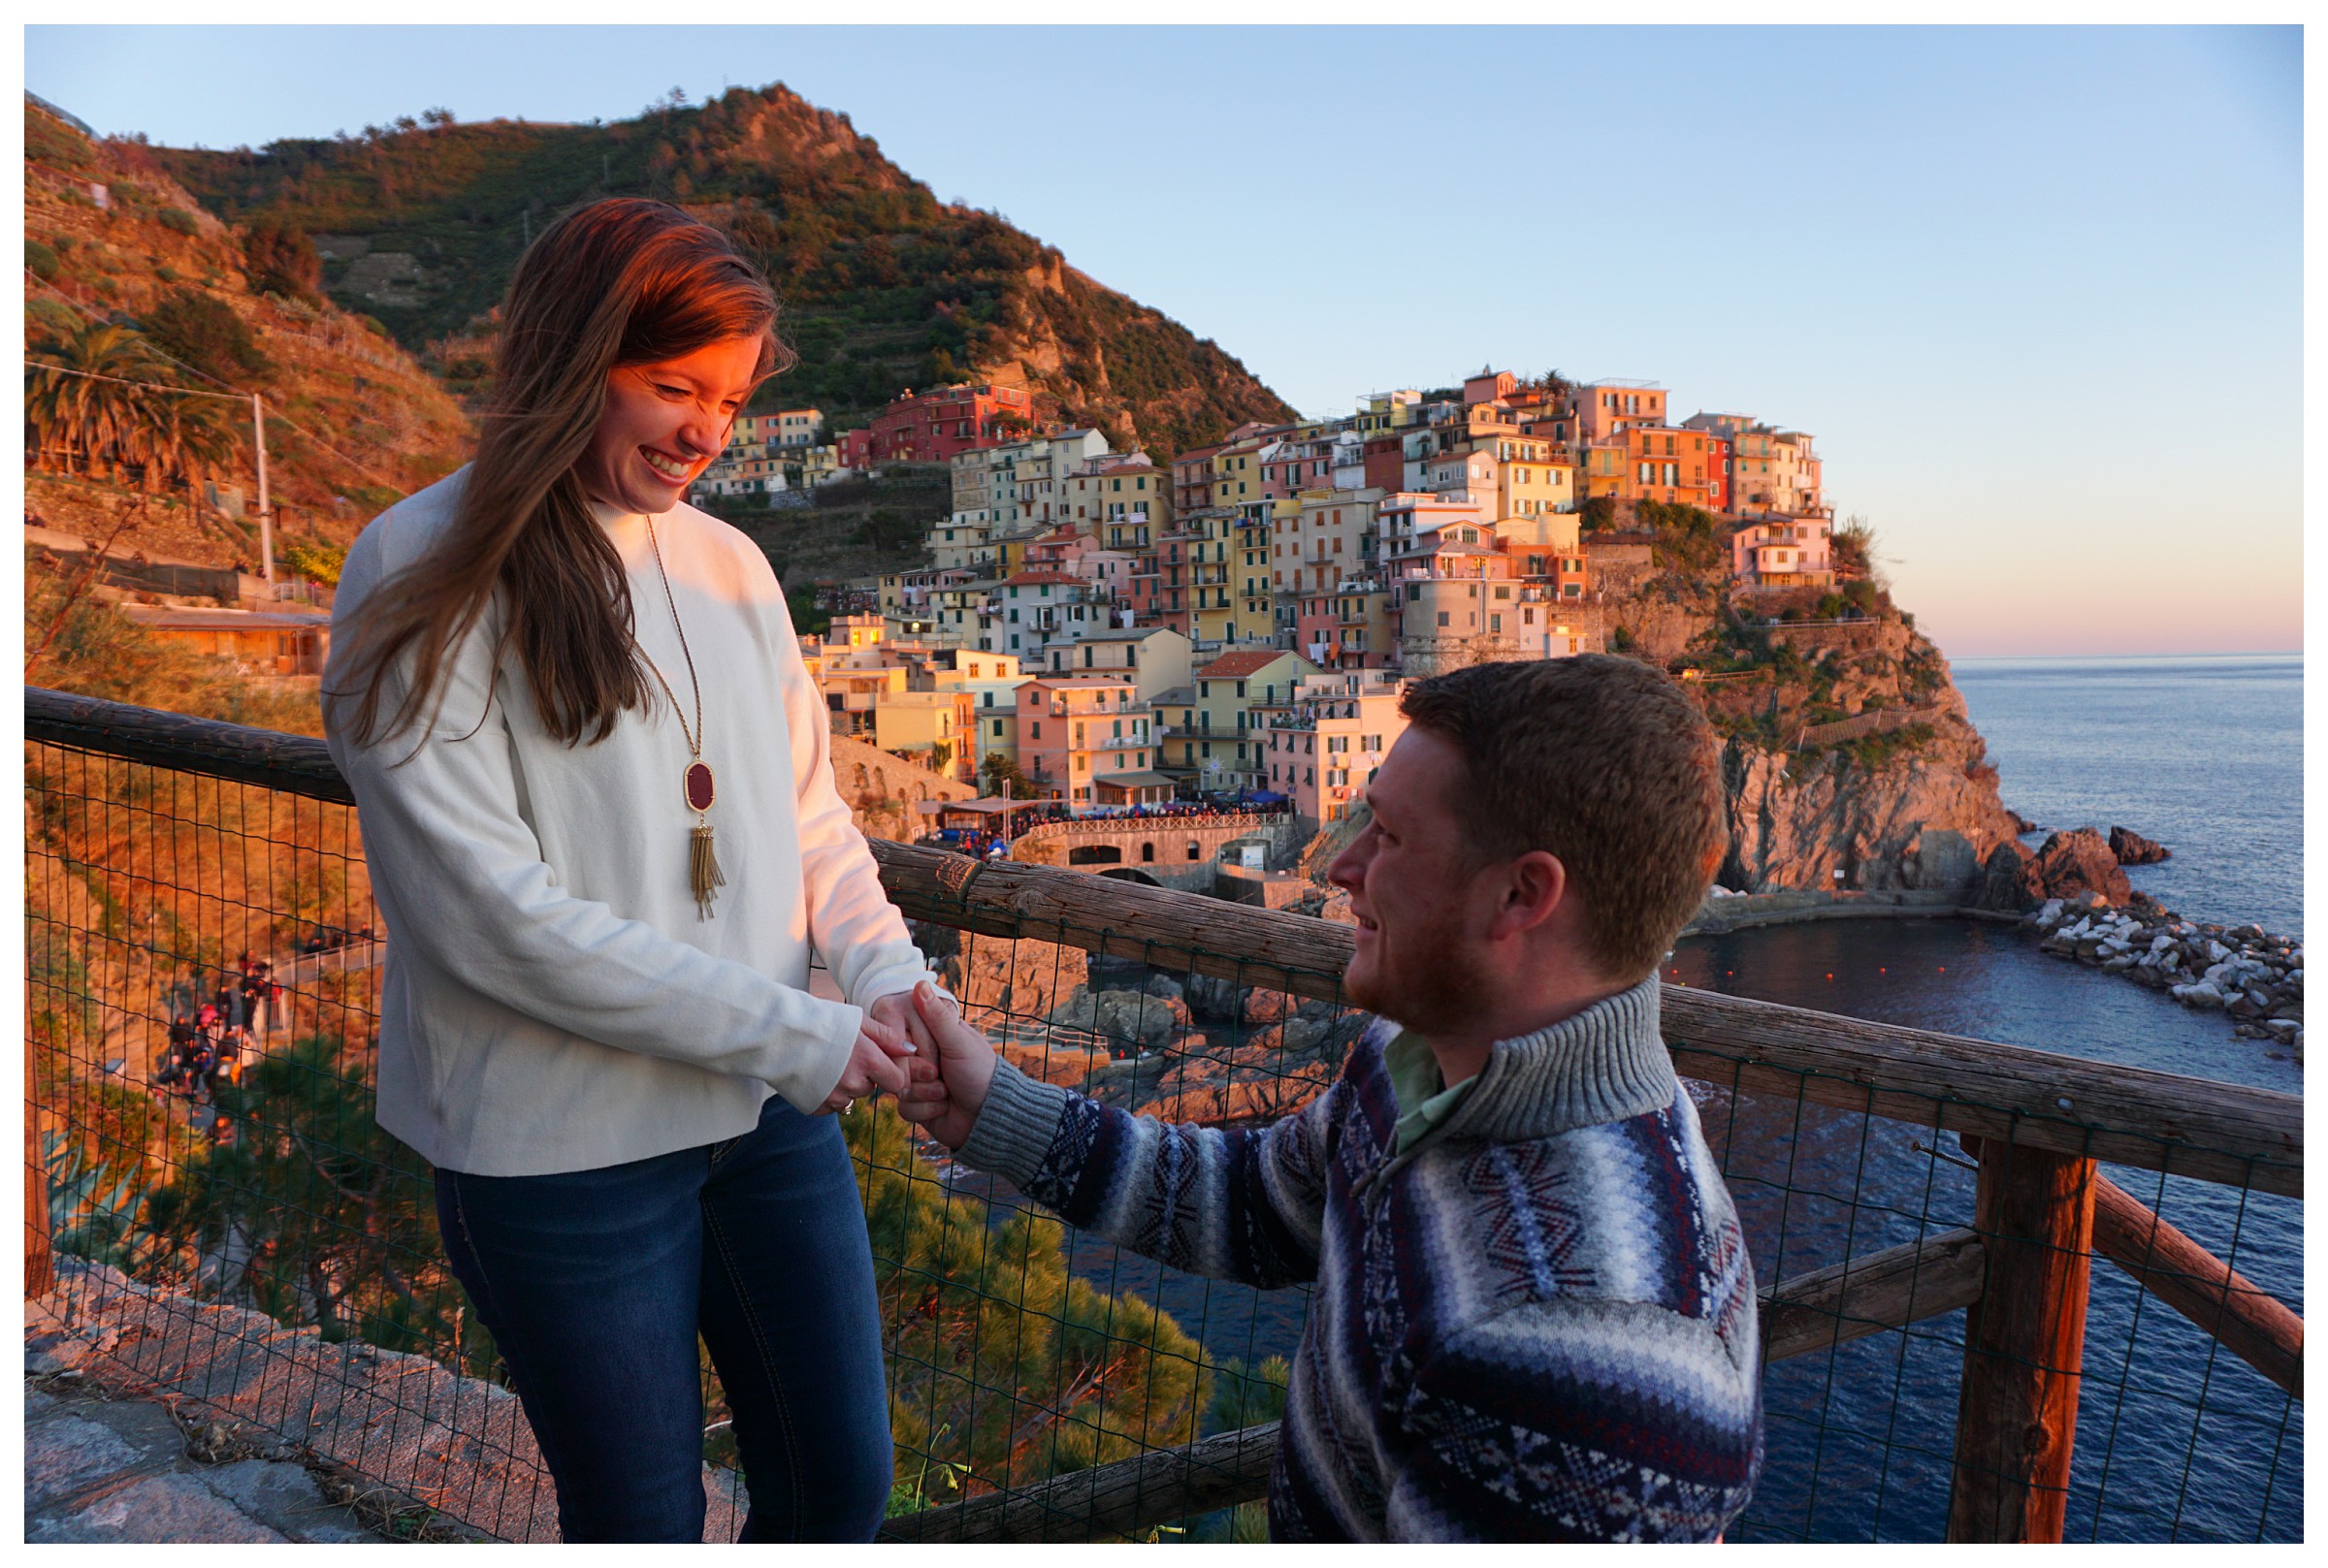 Guy on one knee proposing to girl with a cliffside city called Manarola in the background in Italy